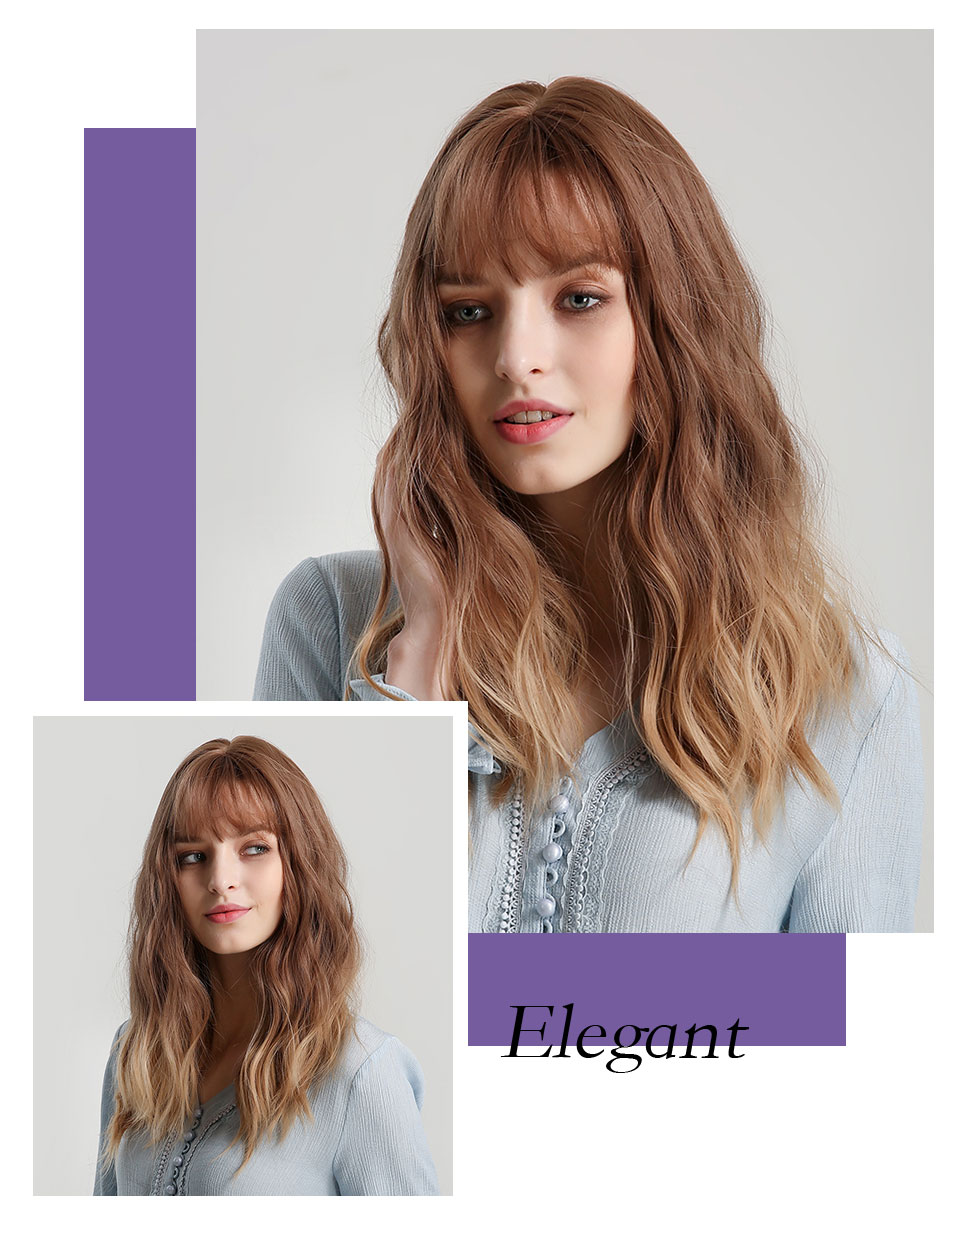 Long Brown Wavy Synthetic Hair With Bangs Women Wig 20 Inches